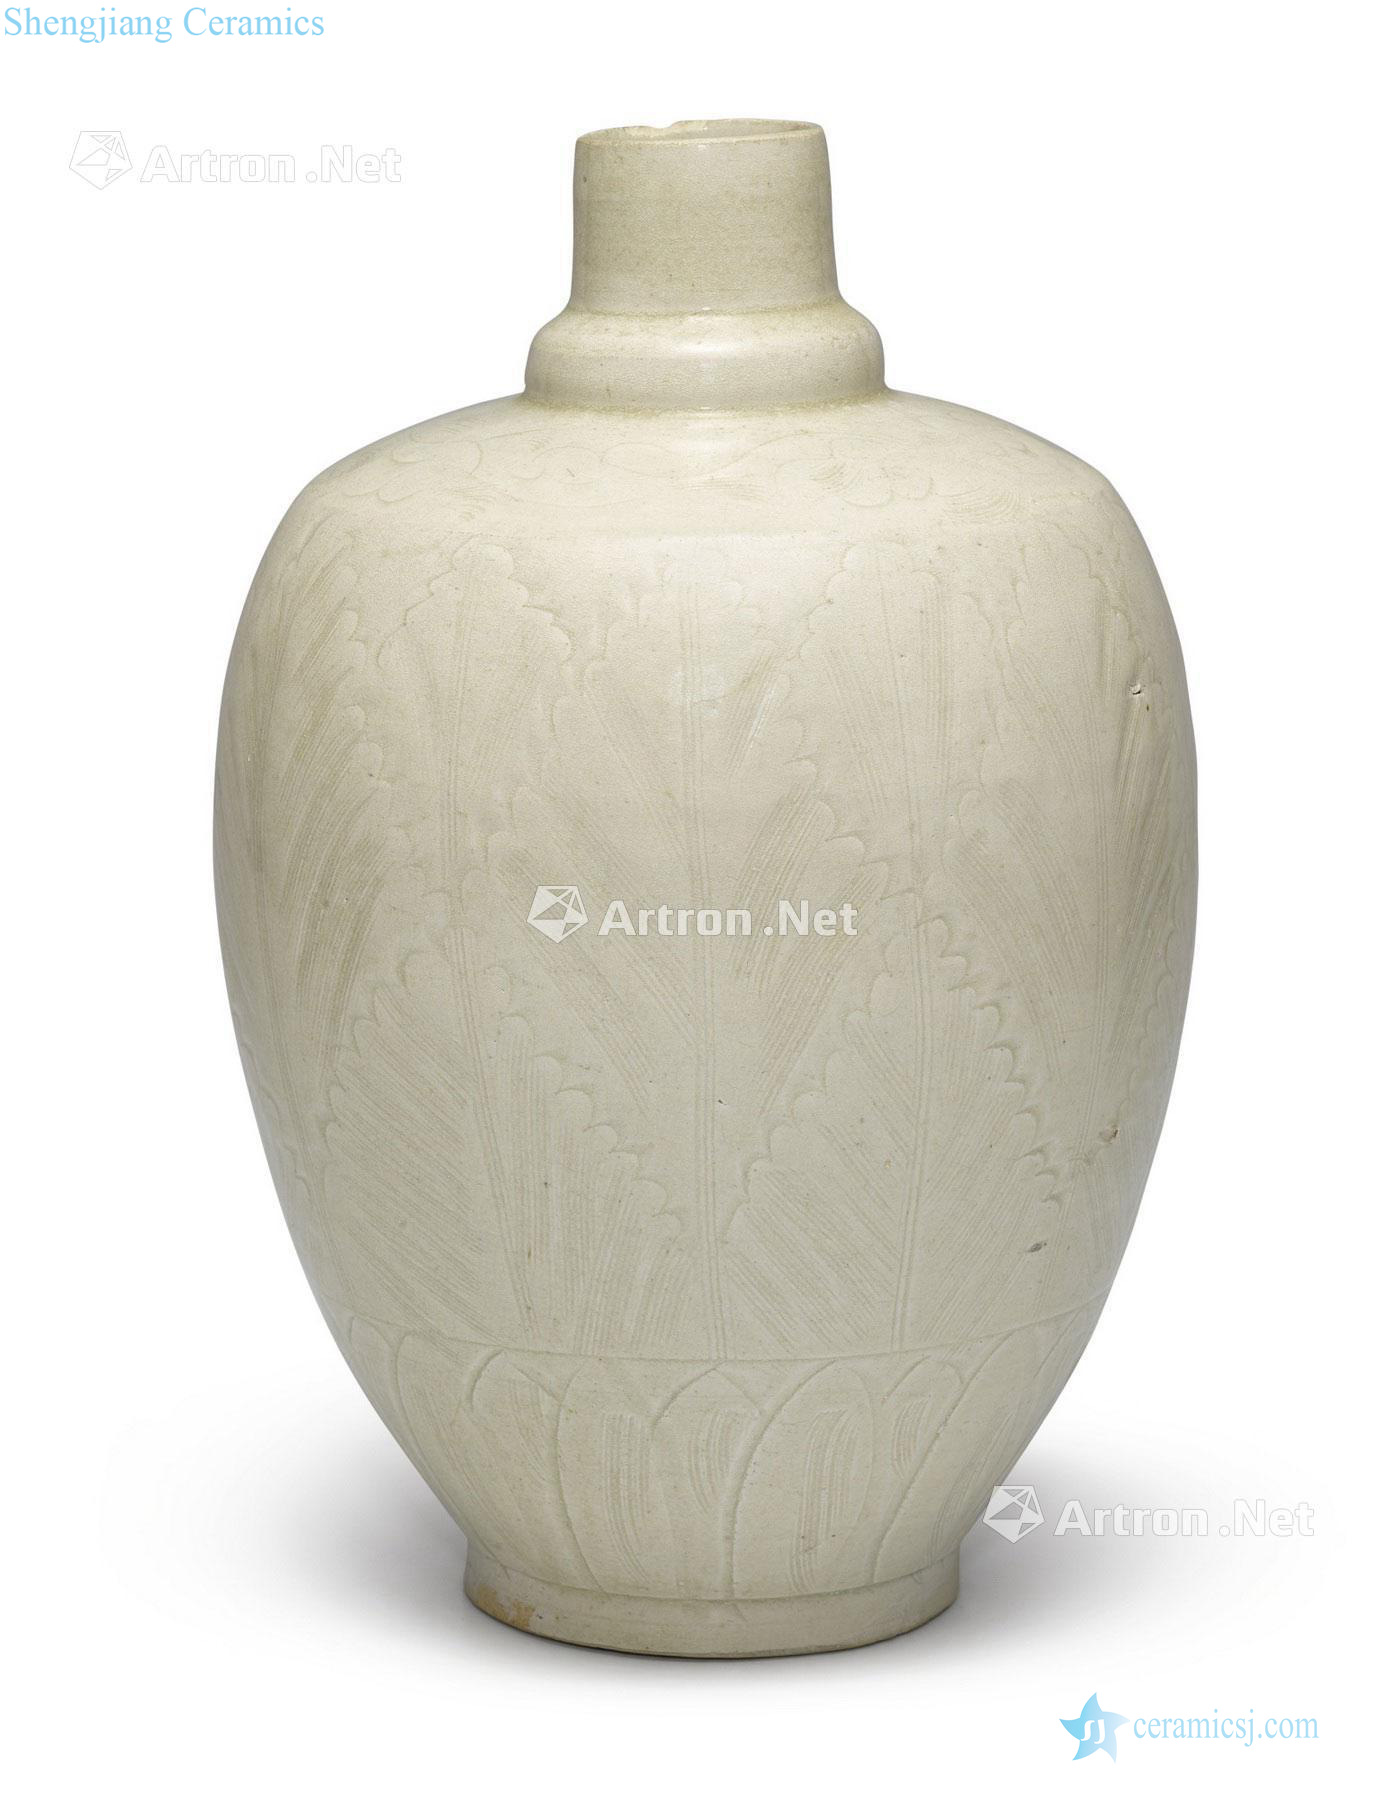 The song dynasty Green leaf veins bottle craft